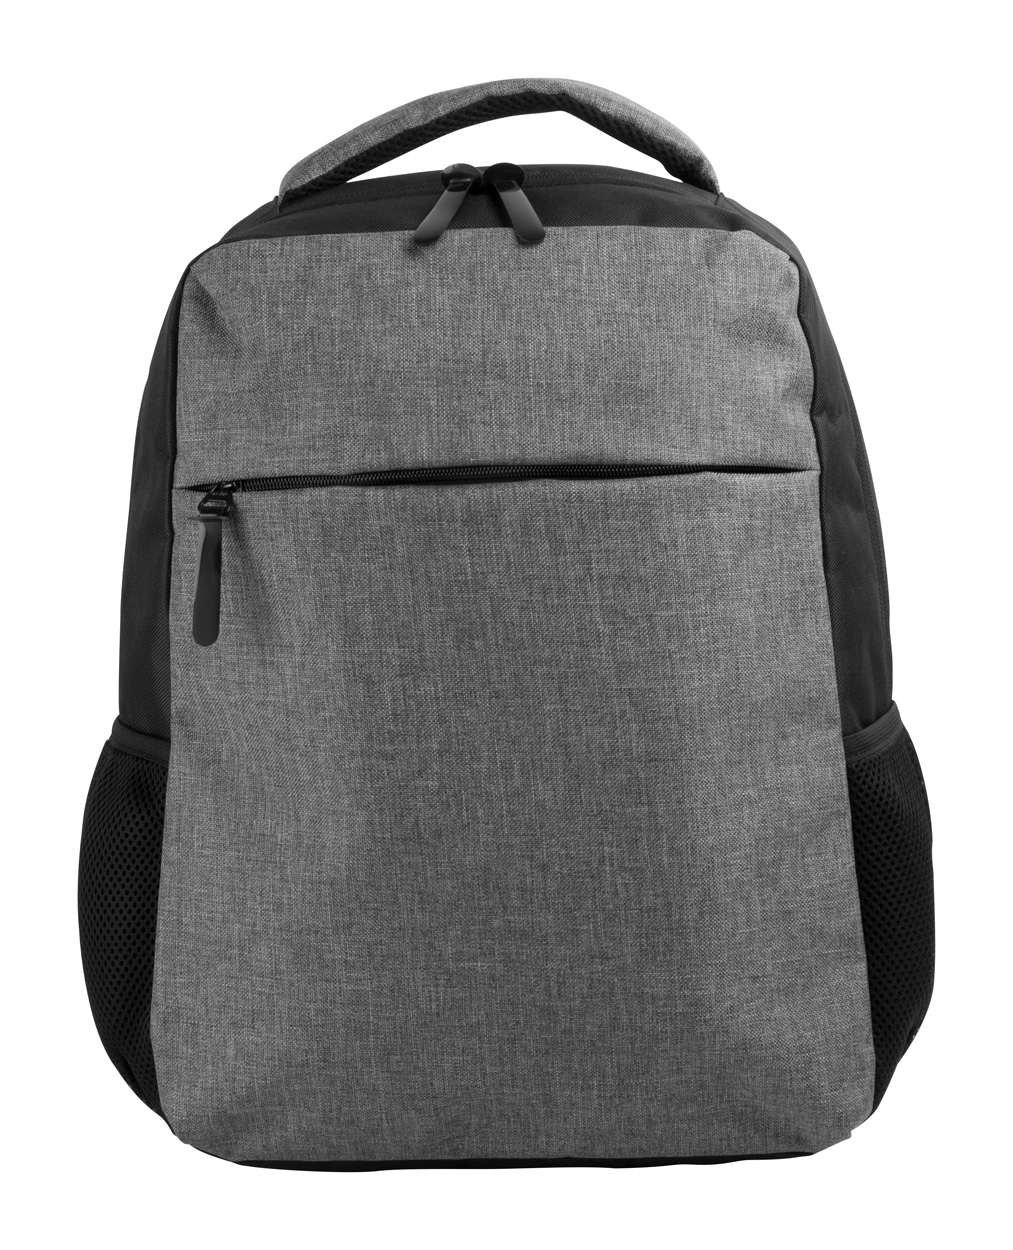 Polyester city backpack SCUBA B with laptop compartment - grey